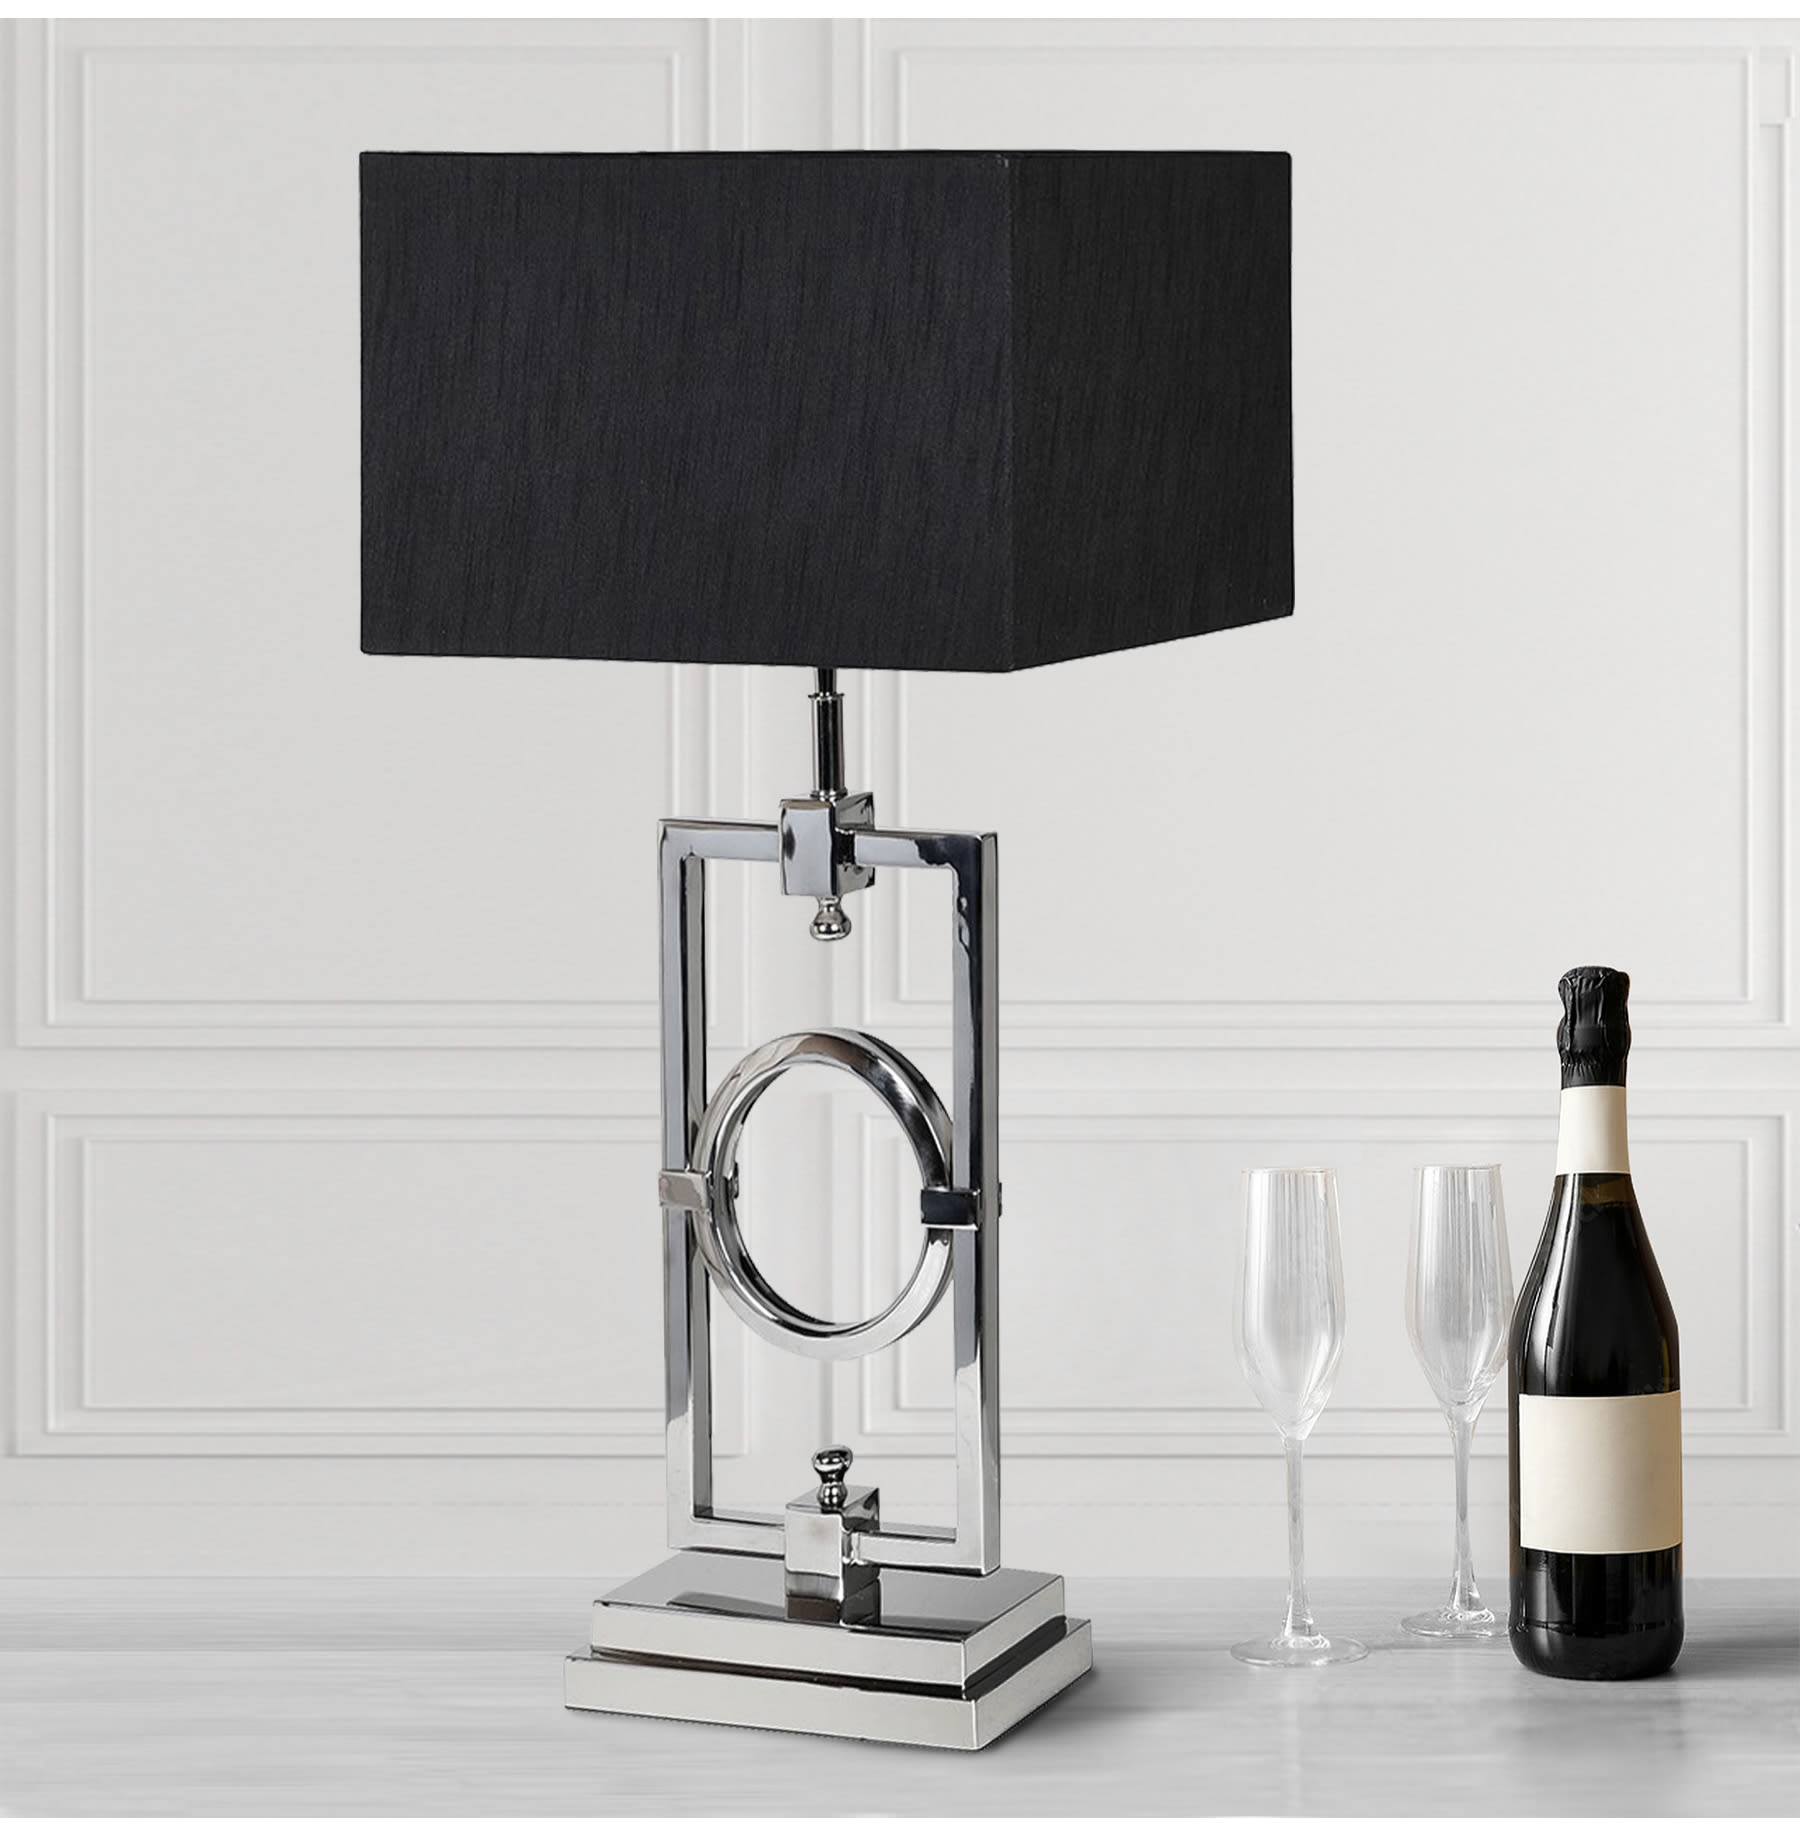 Geometric Silver Lamp with Black Shade